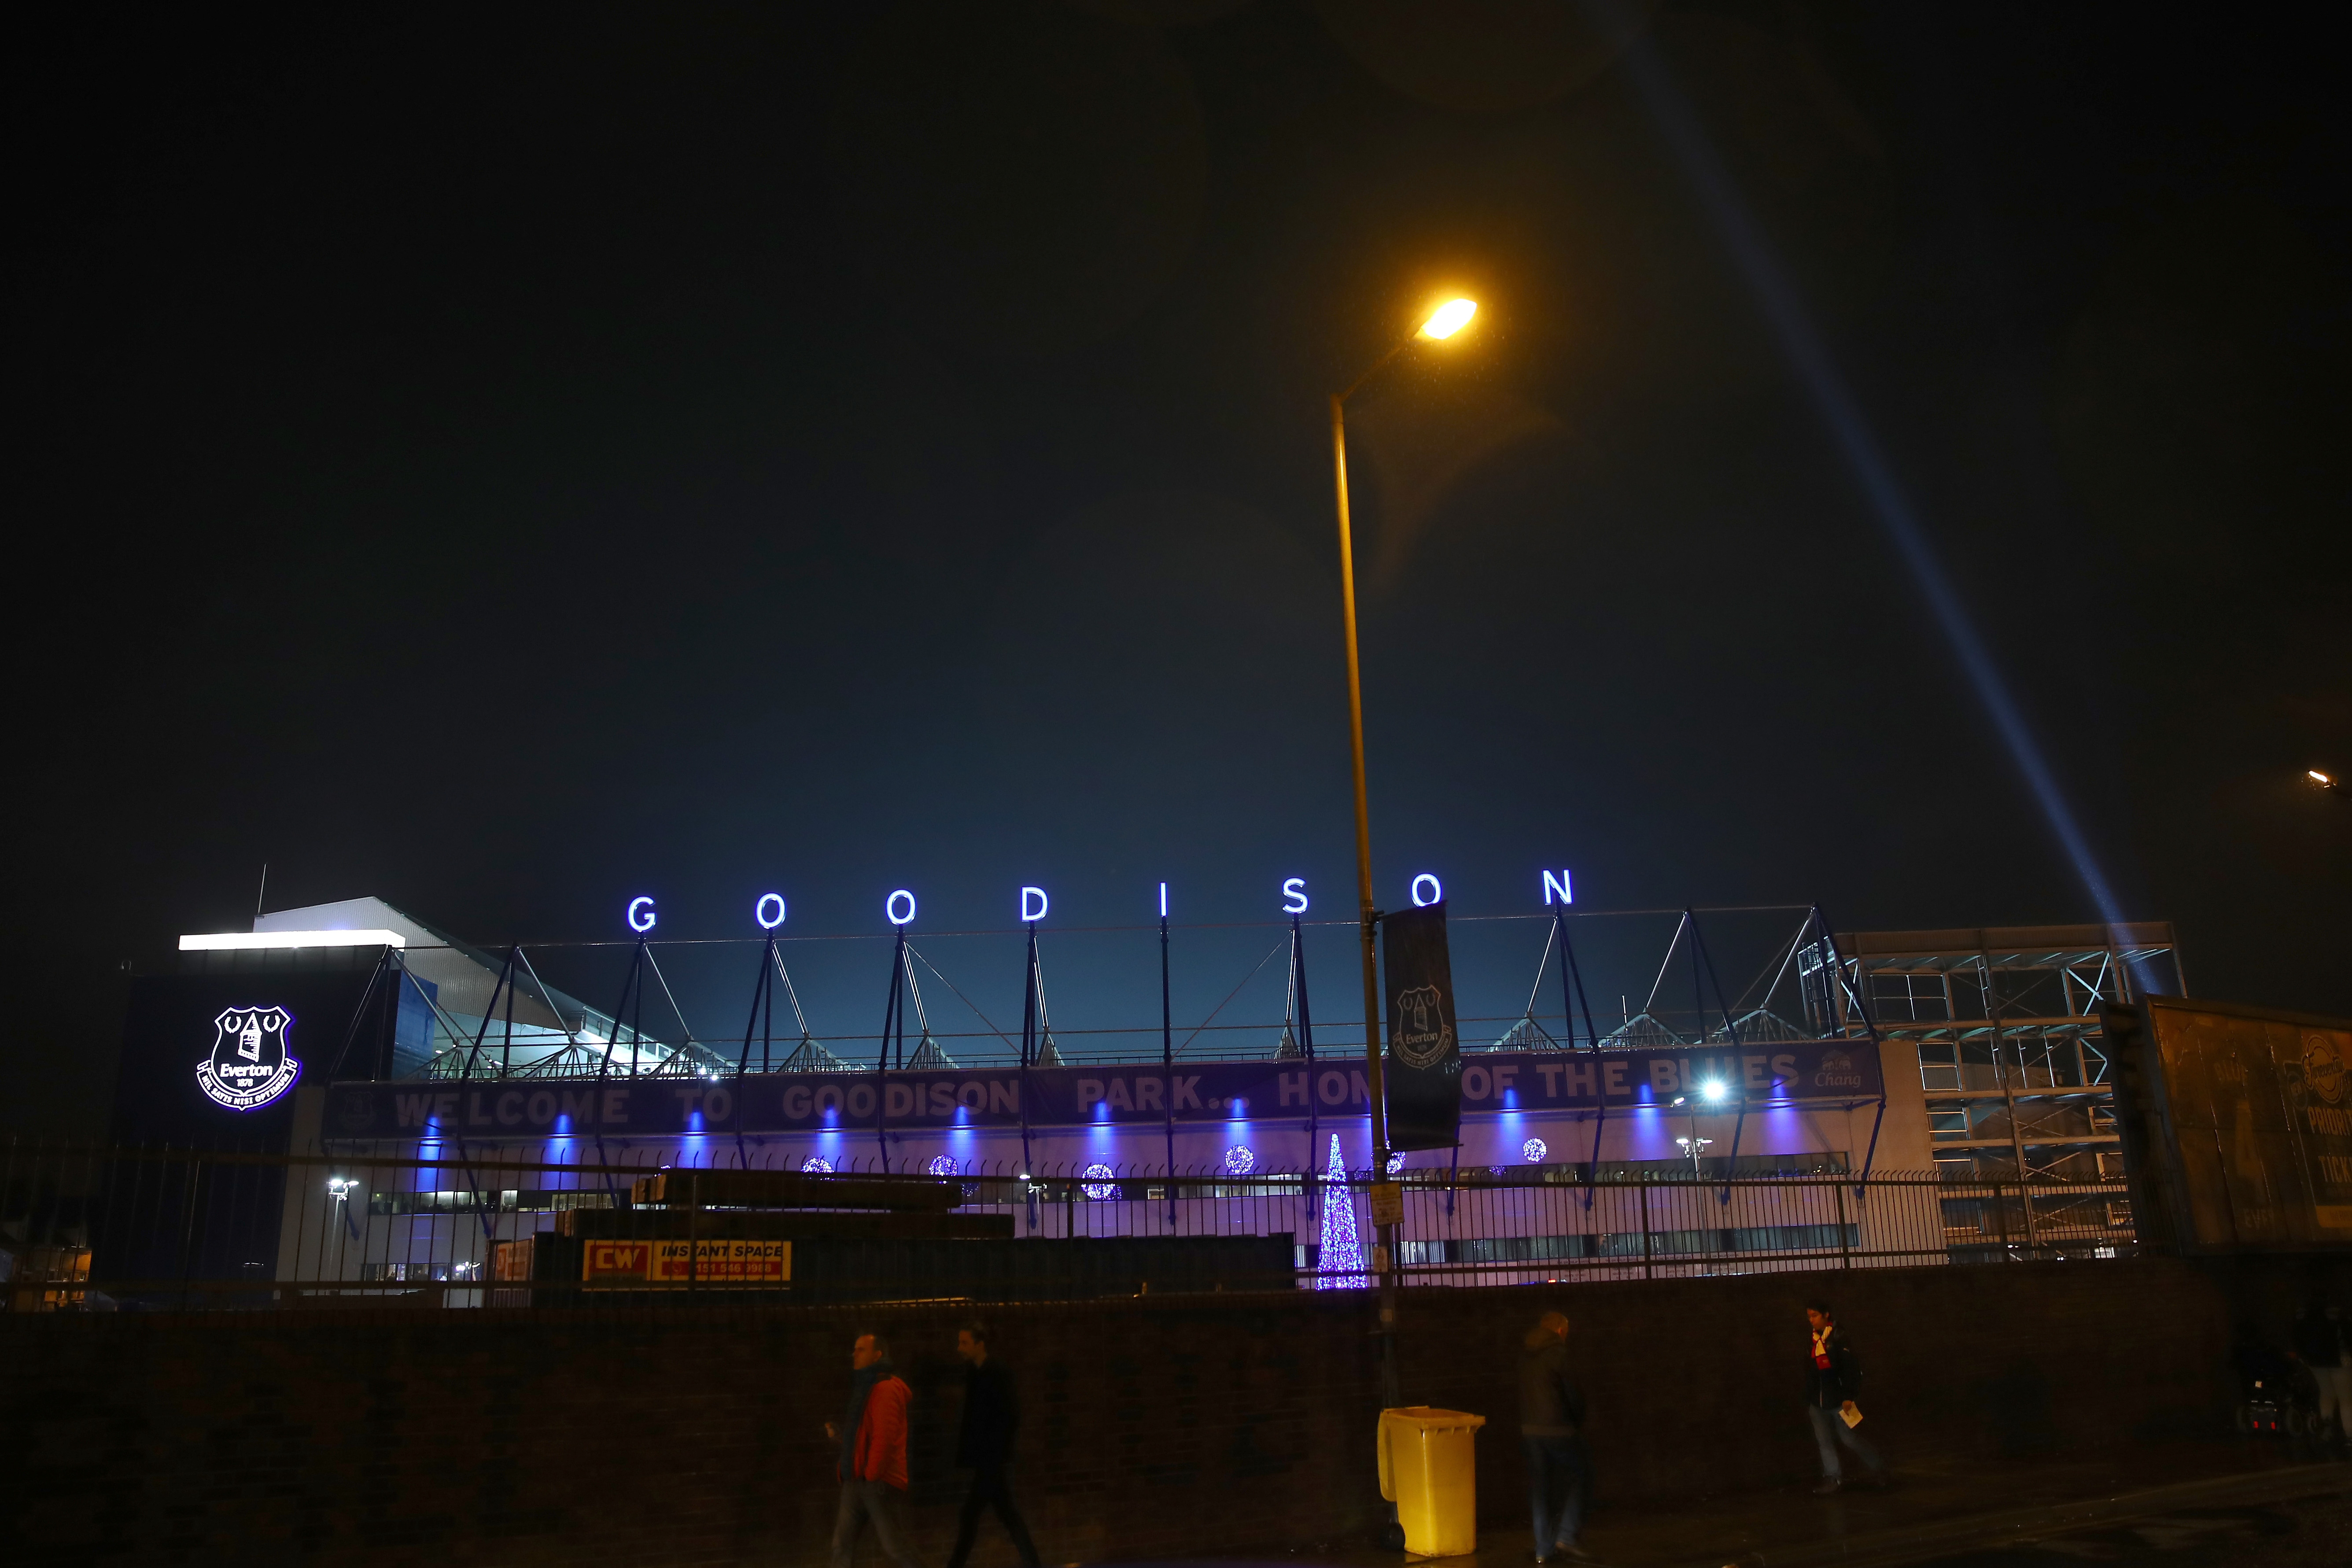 LIVERPOOL, ENGLAND - DECEMBER 13:  A general view of the stadium exterior prior to kickoff during the Premier League match between Everton and Arsenal at Goodison Park on December 13, 2016 in Liverpool, England.  (Photo by Clive Brunskill/Getty Images)